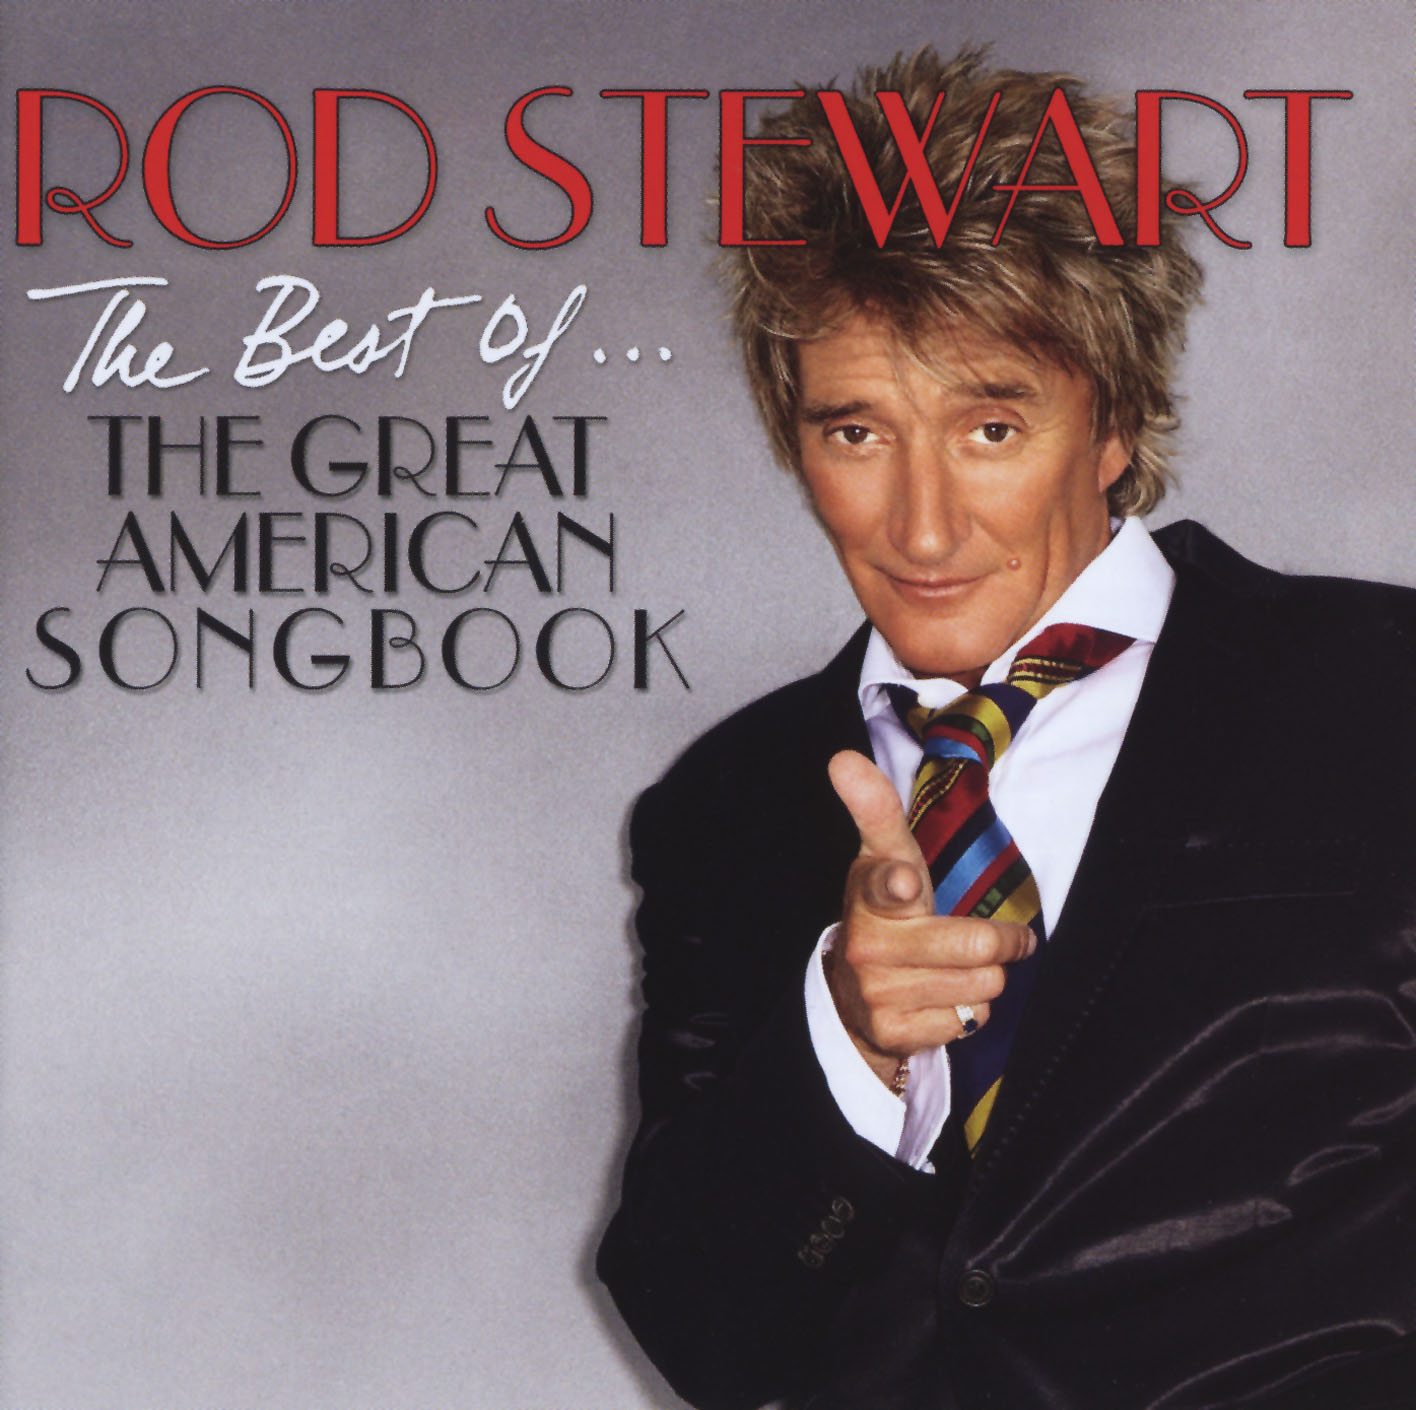 The Best Of… The Great American Songbook